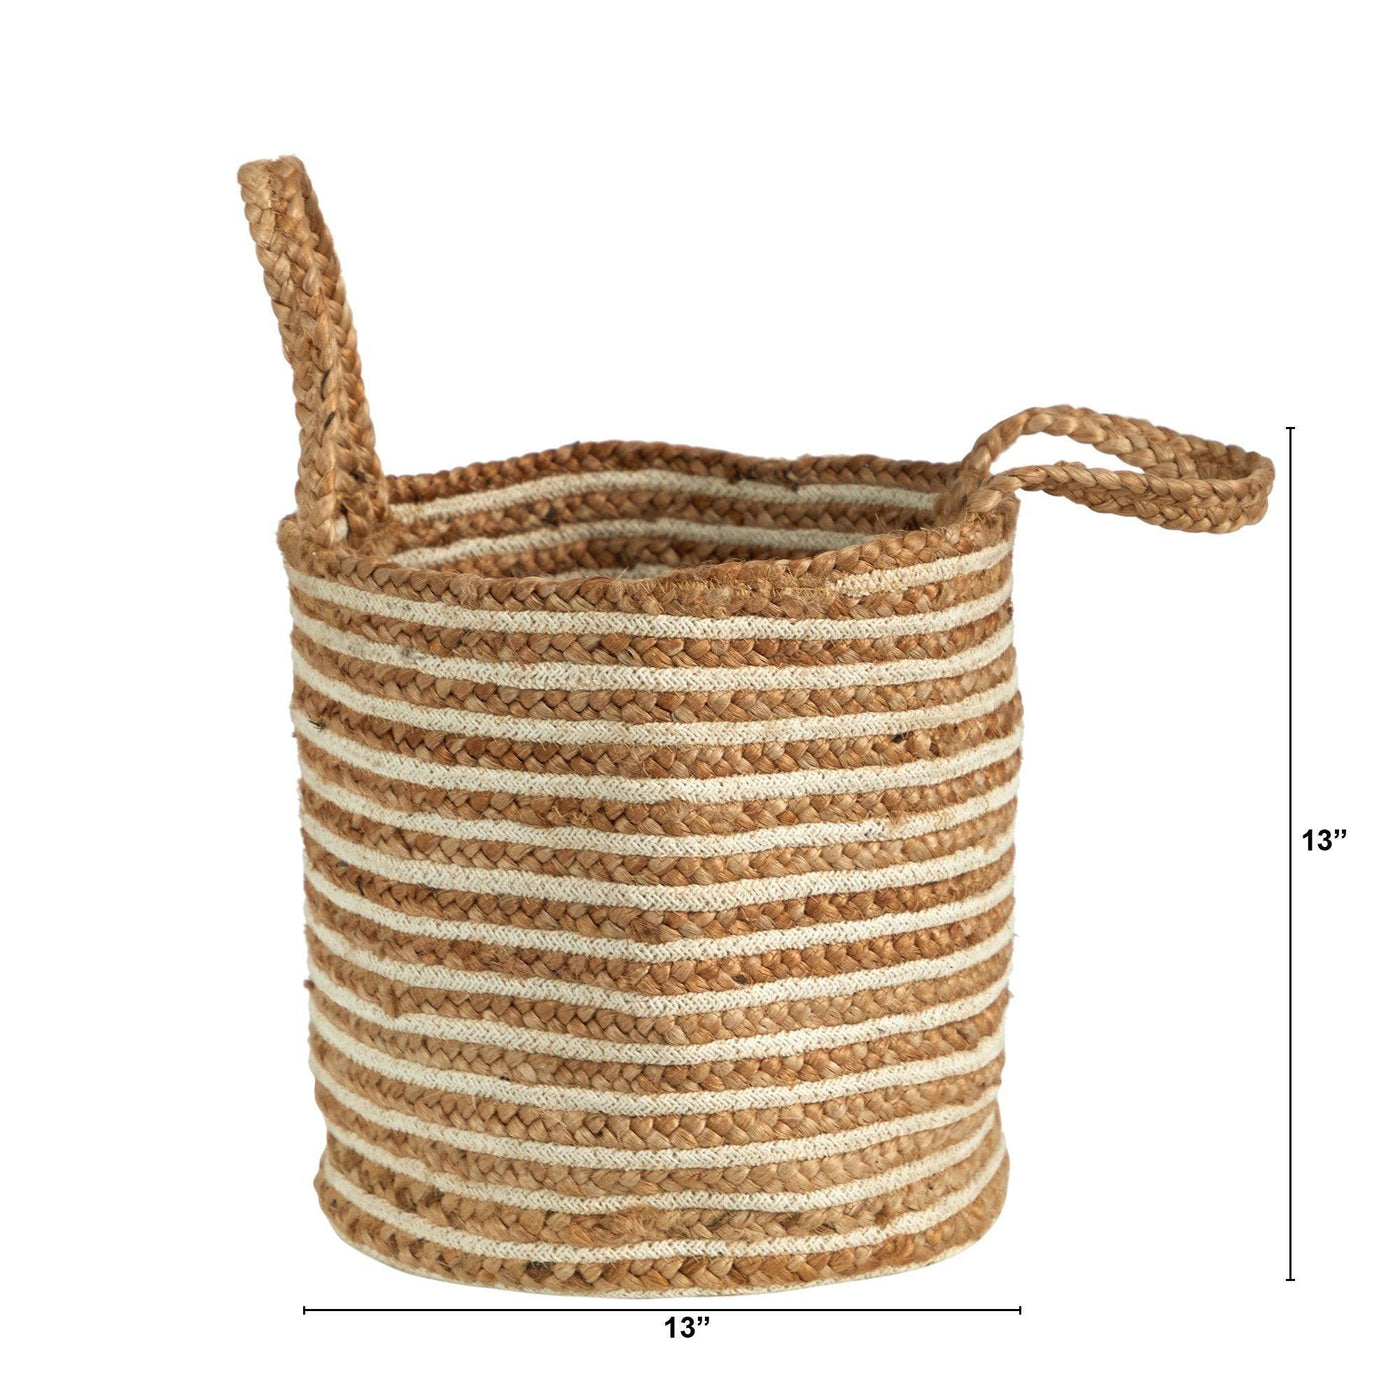 14” Boho Chic Basket Natural Cotton and Jute, Handwoven Stripe with Handles by Nearly Natural - Vysn